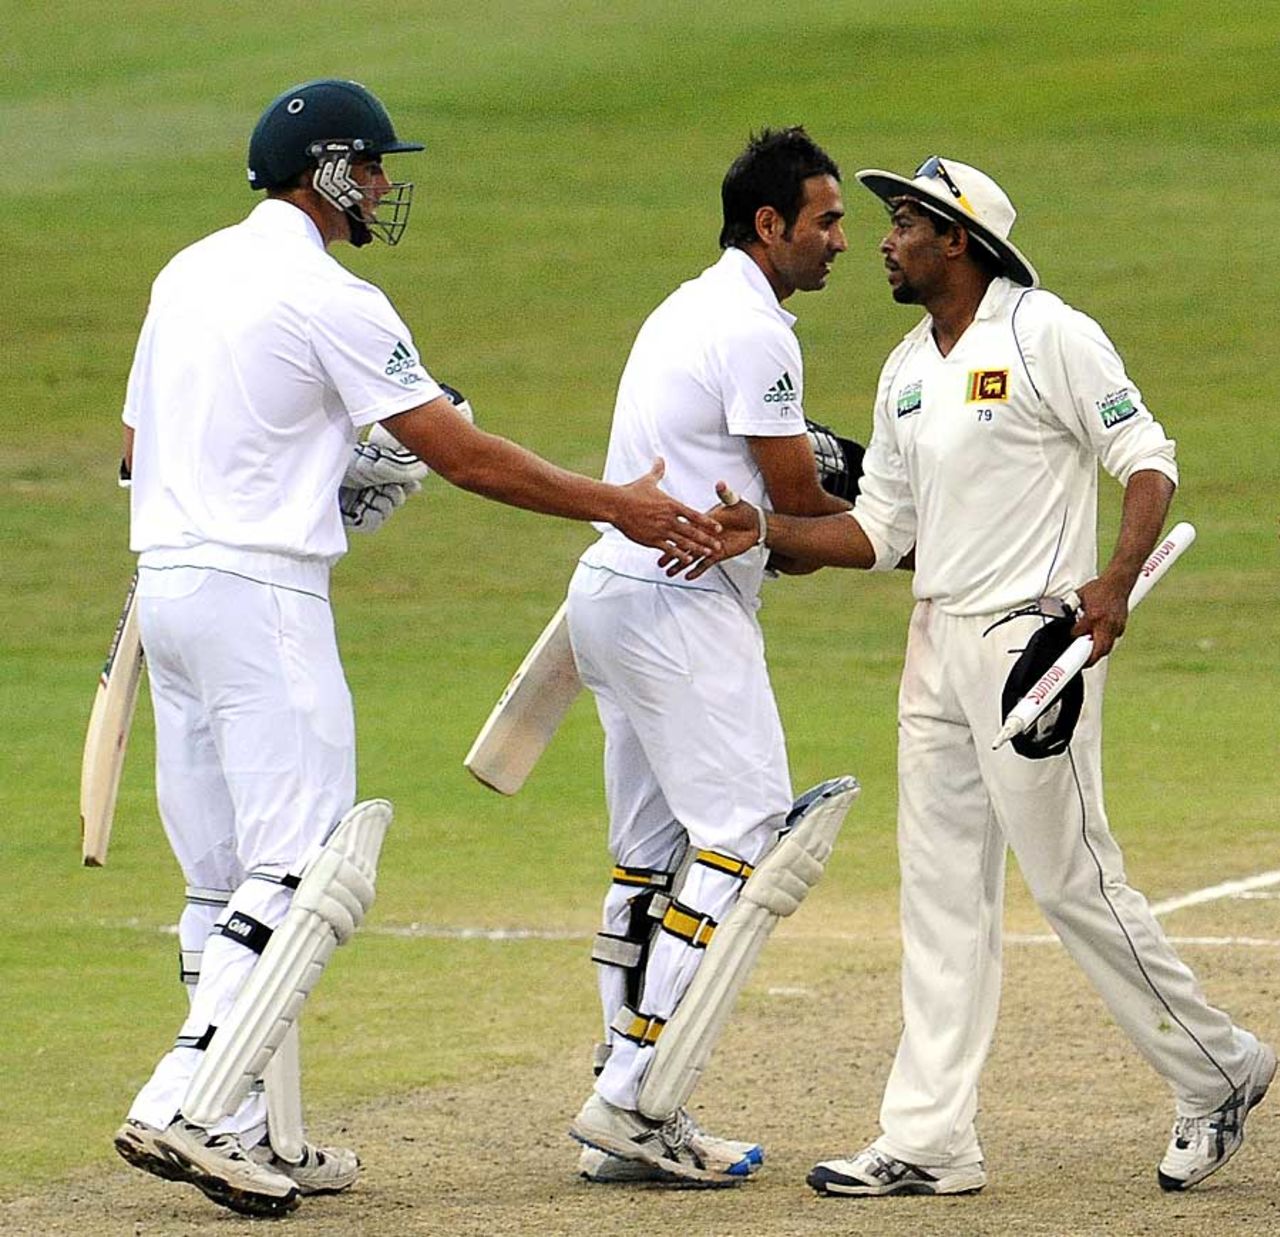 Tillakaratne Dilshan celebrated his first Test win as captain, South Africa v Sri Lanka, 2nd Test, Durban, 4th day, December 29, 2011